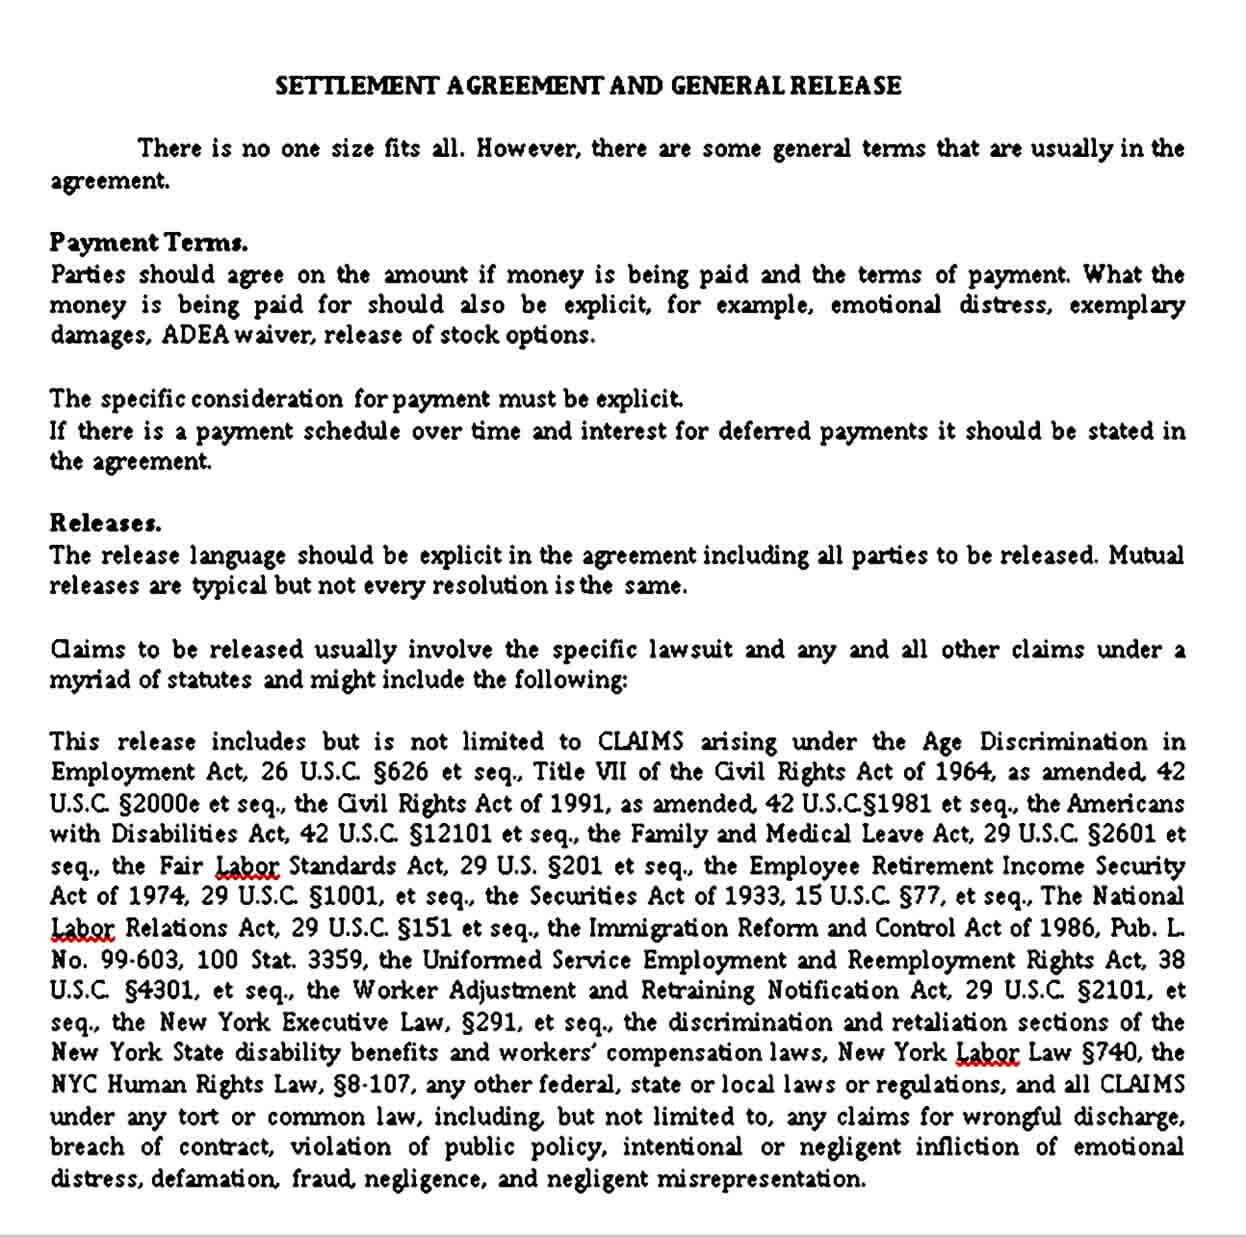 Settlement Agreement and General Release Document